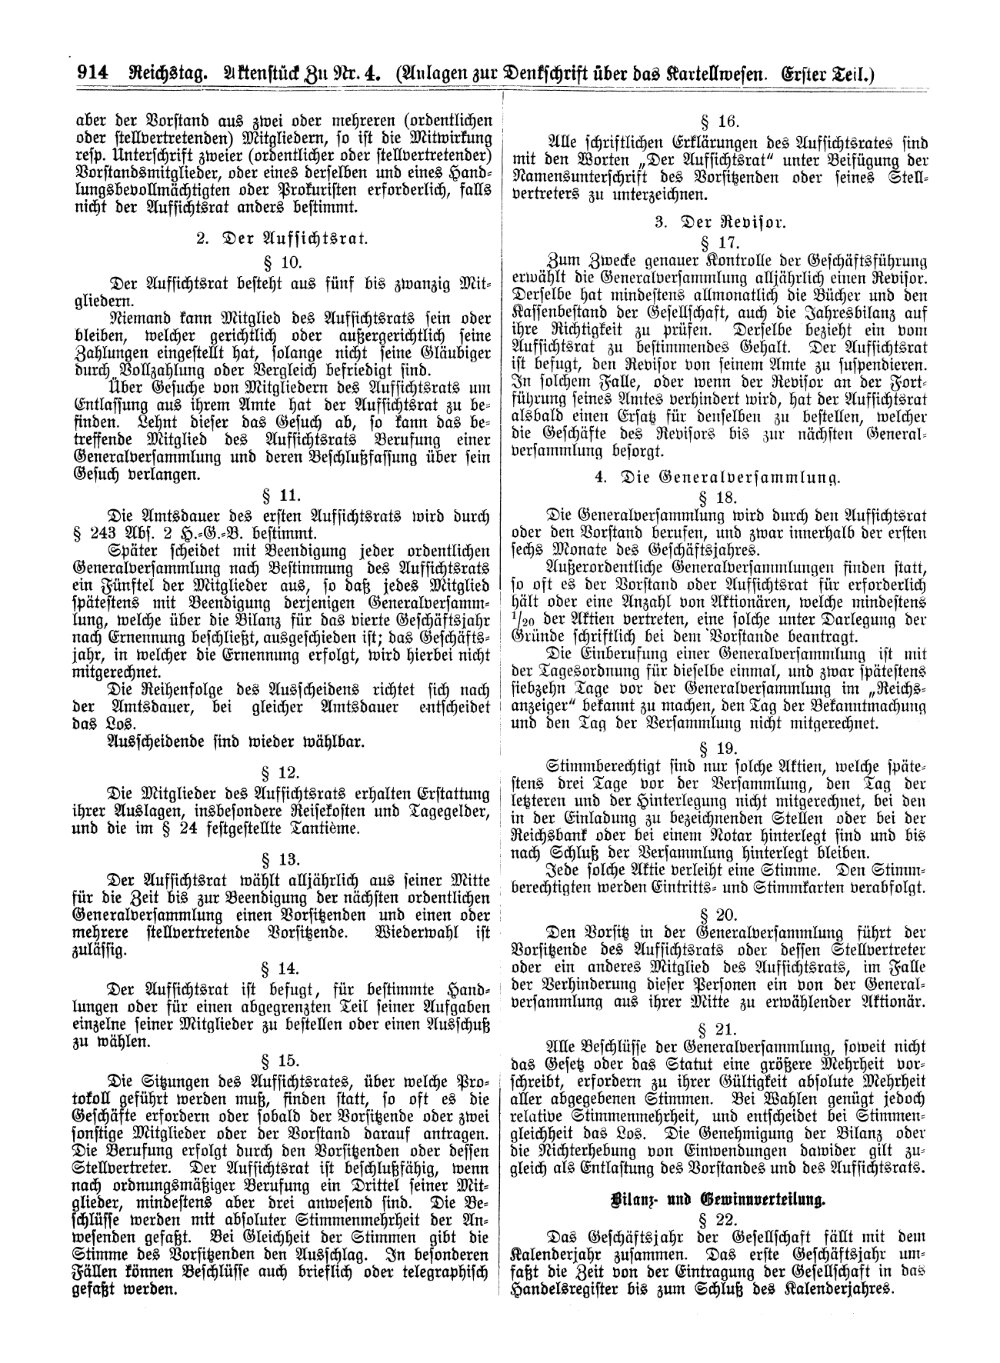 Scan of page 914